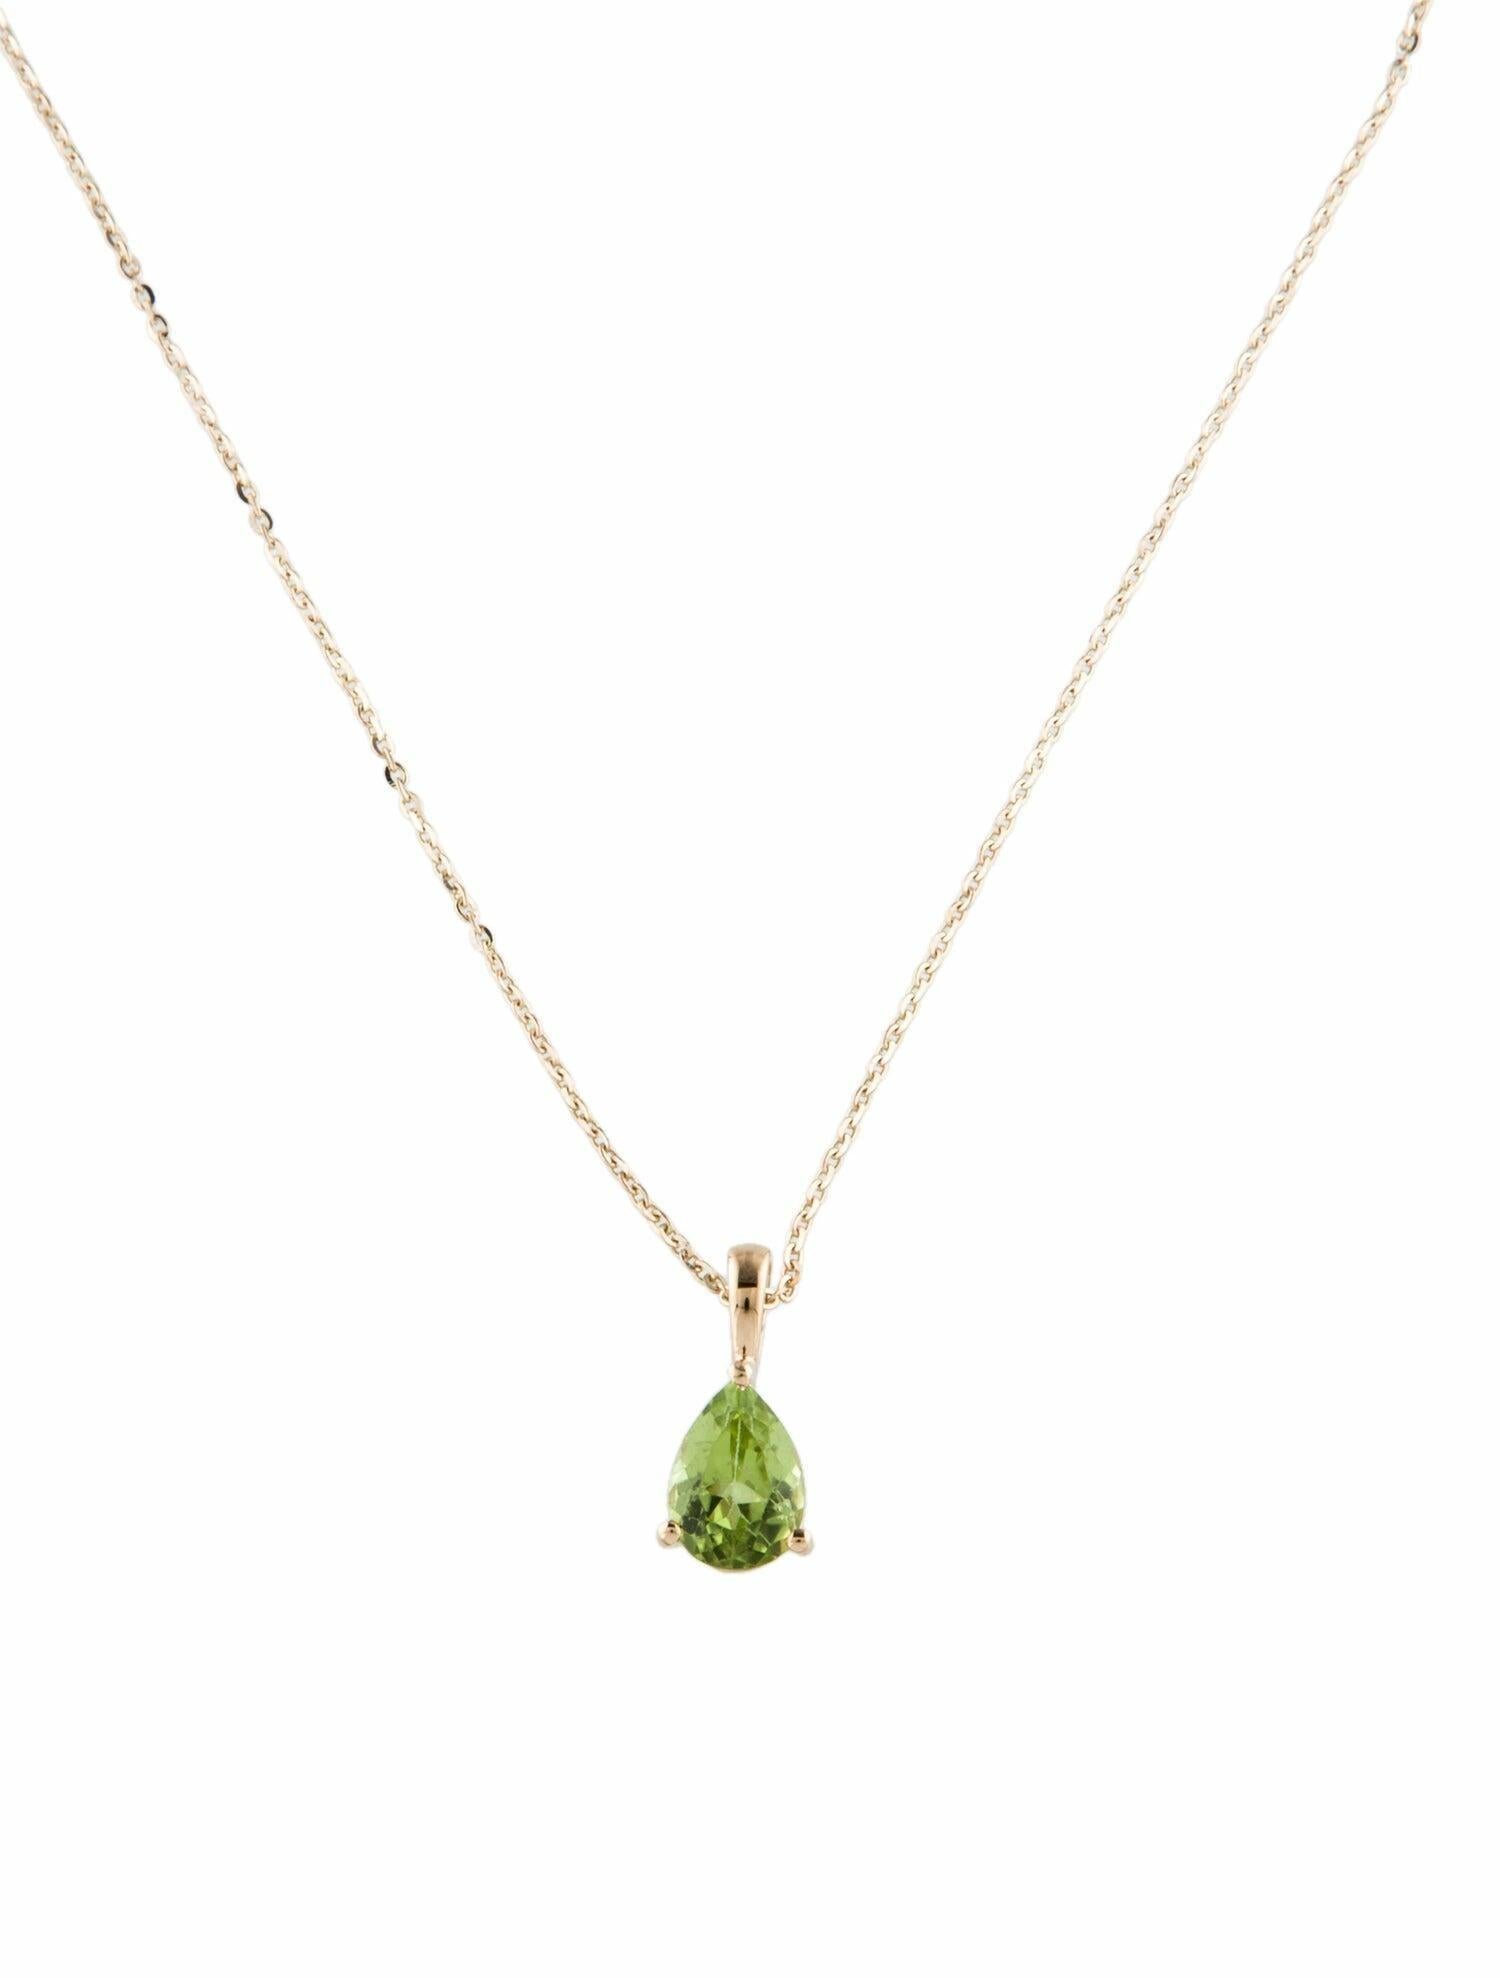 Discover the elegance and allure of this 14K Yellow Gold Peridot Pendant Necklace, a fine jewelry piece that marries classic sophistication with modern design. Perfect for those who appreciate the beauty of natural gemstones, this pendant features a